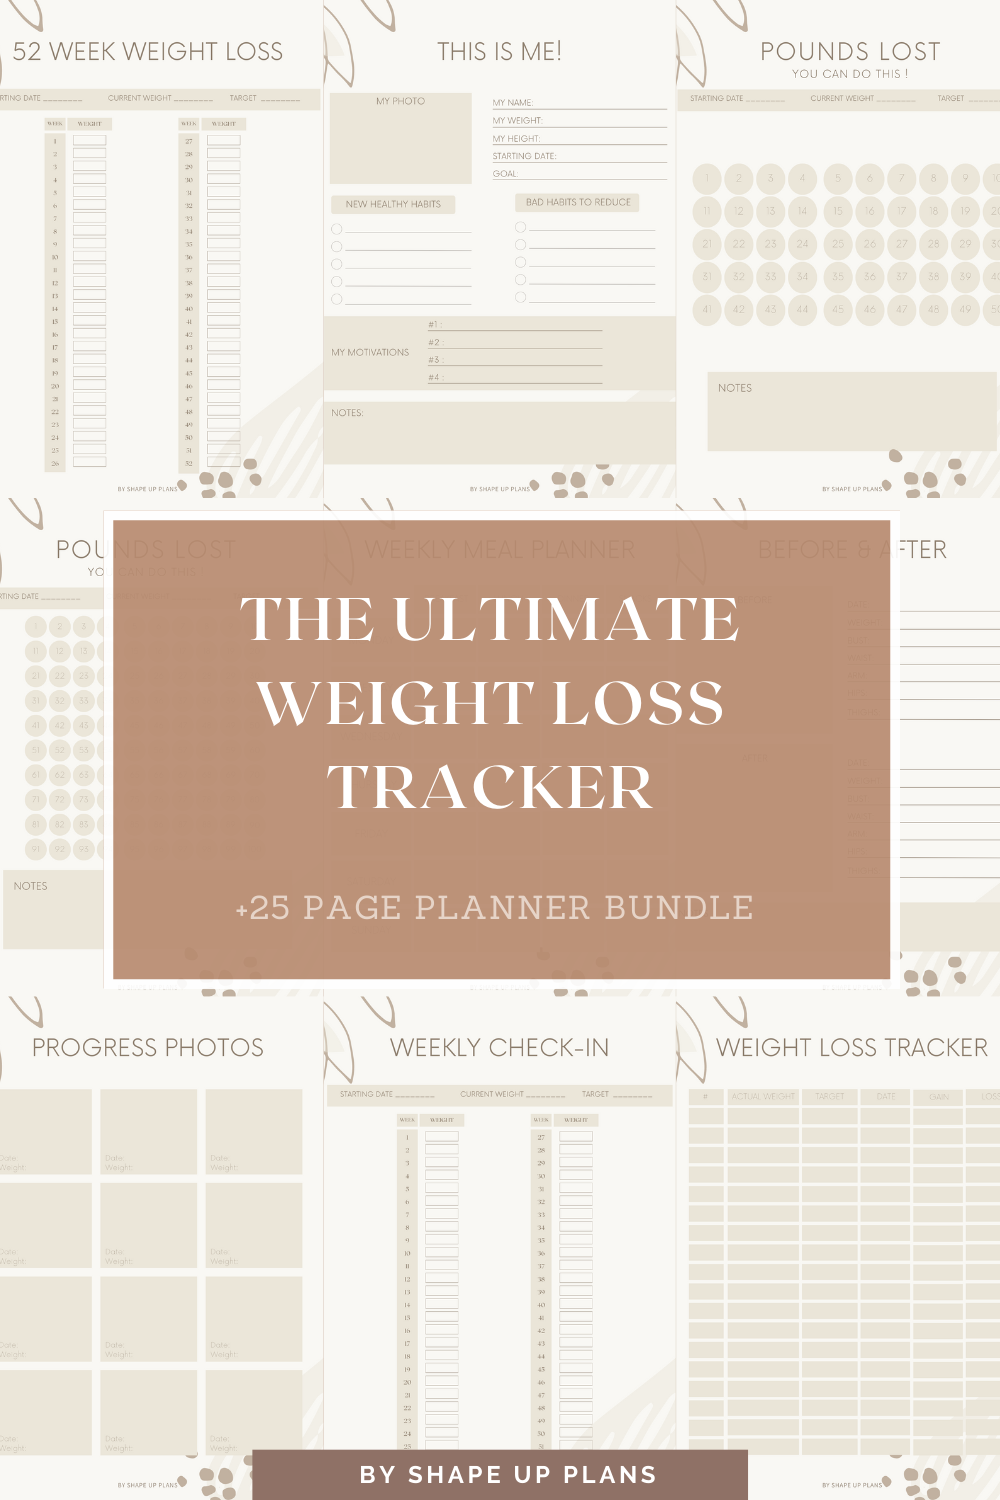 ULTIMATE and MINIMALIST Wellness Bundle Pack For a Happier and Healthier You